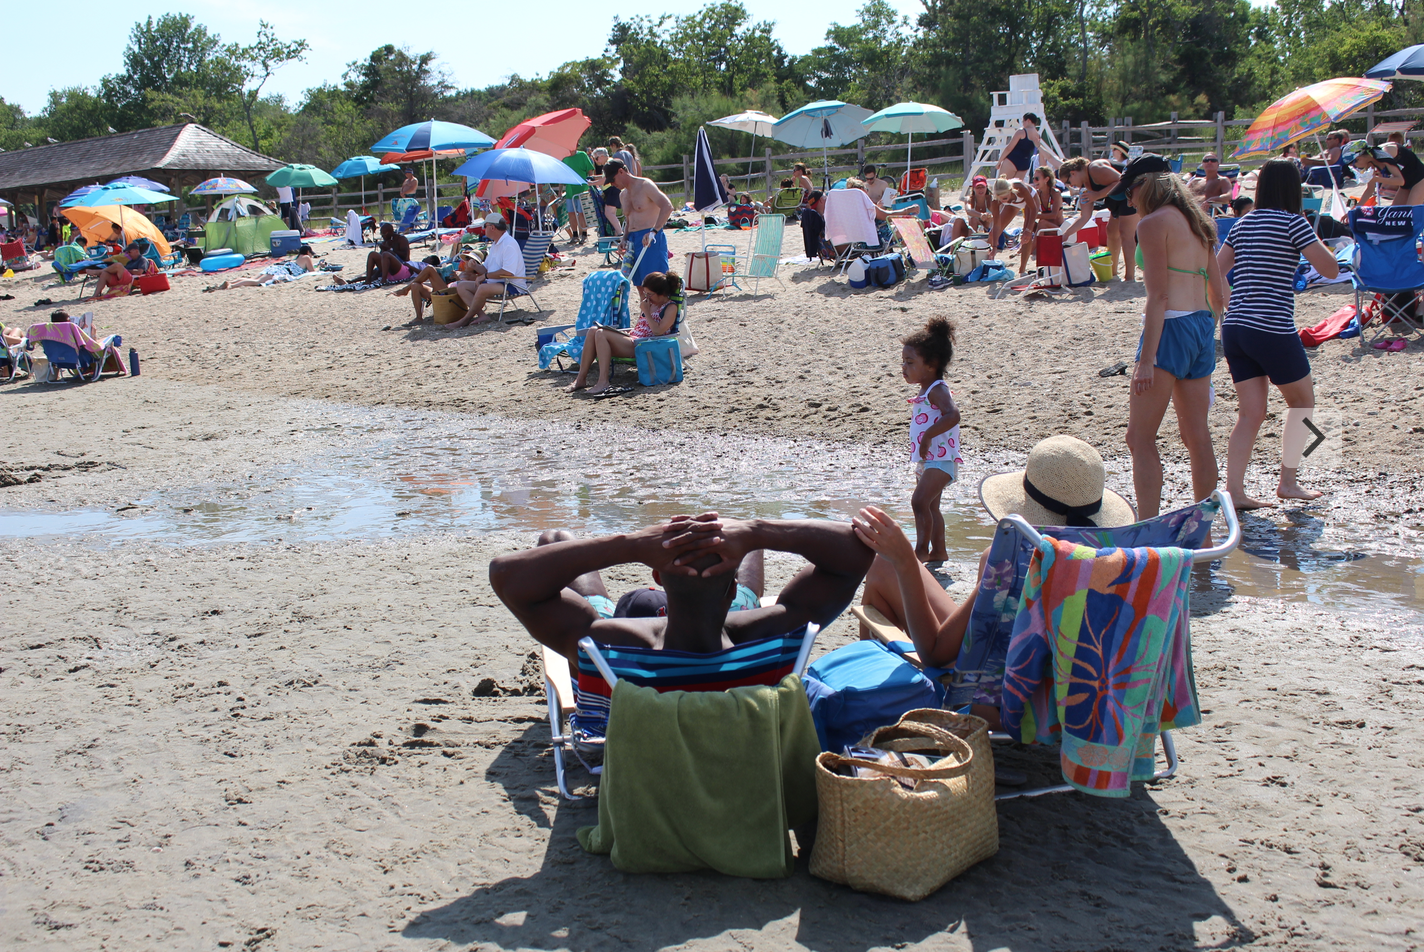  Crowded weekend at Tod's Point, August, 2015. credit: Leslie Yager